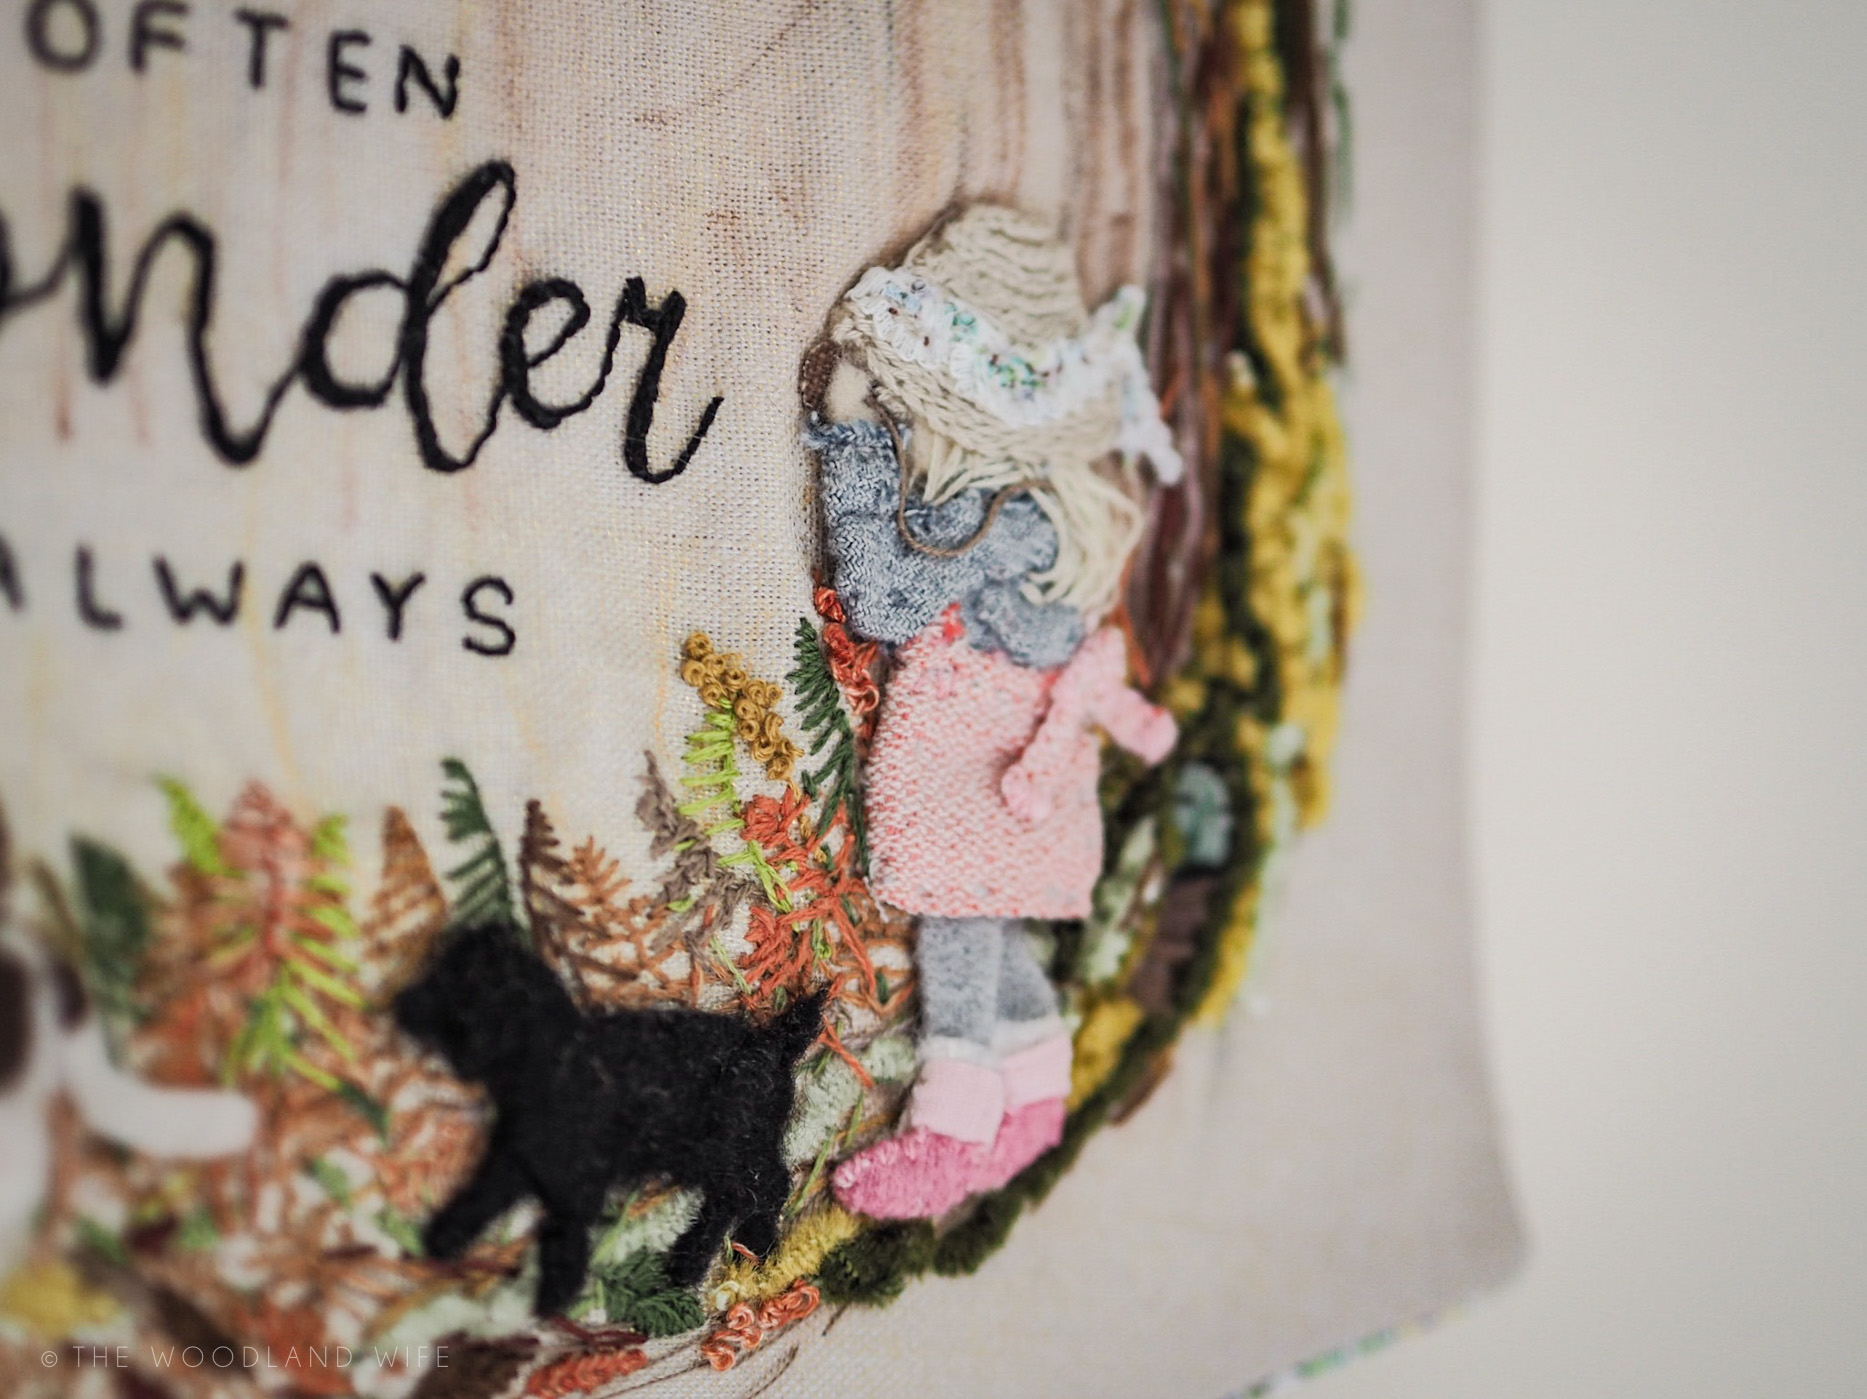 The Woodland Wife - Olly and Mills - Fabric Picture - Textile Art Wall Hanging - Fabric Banner